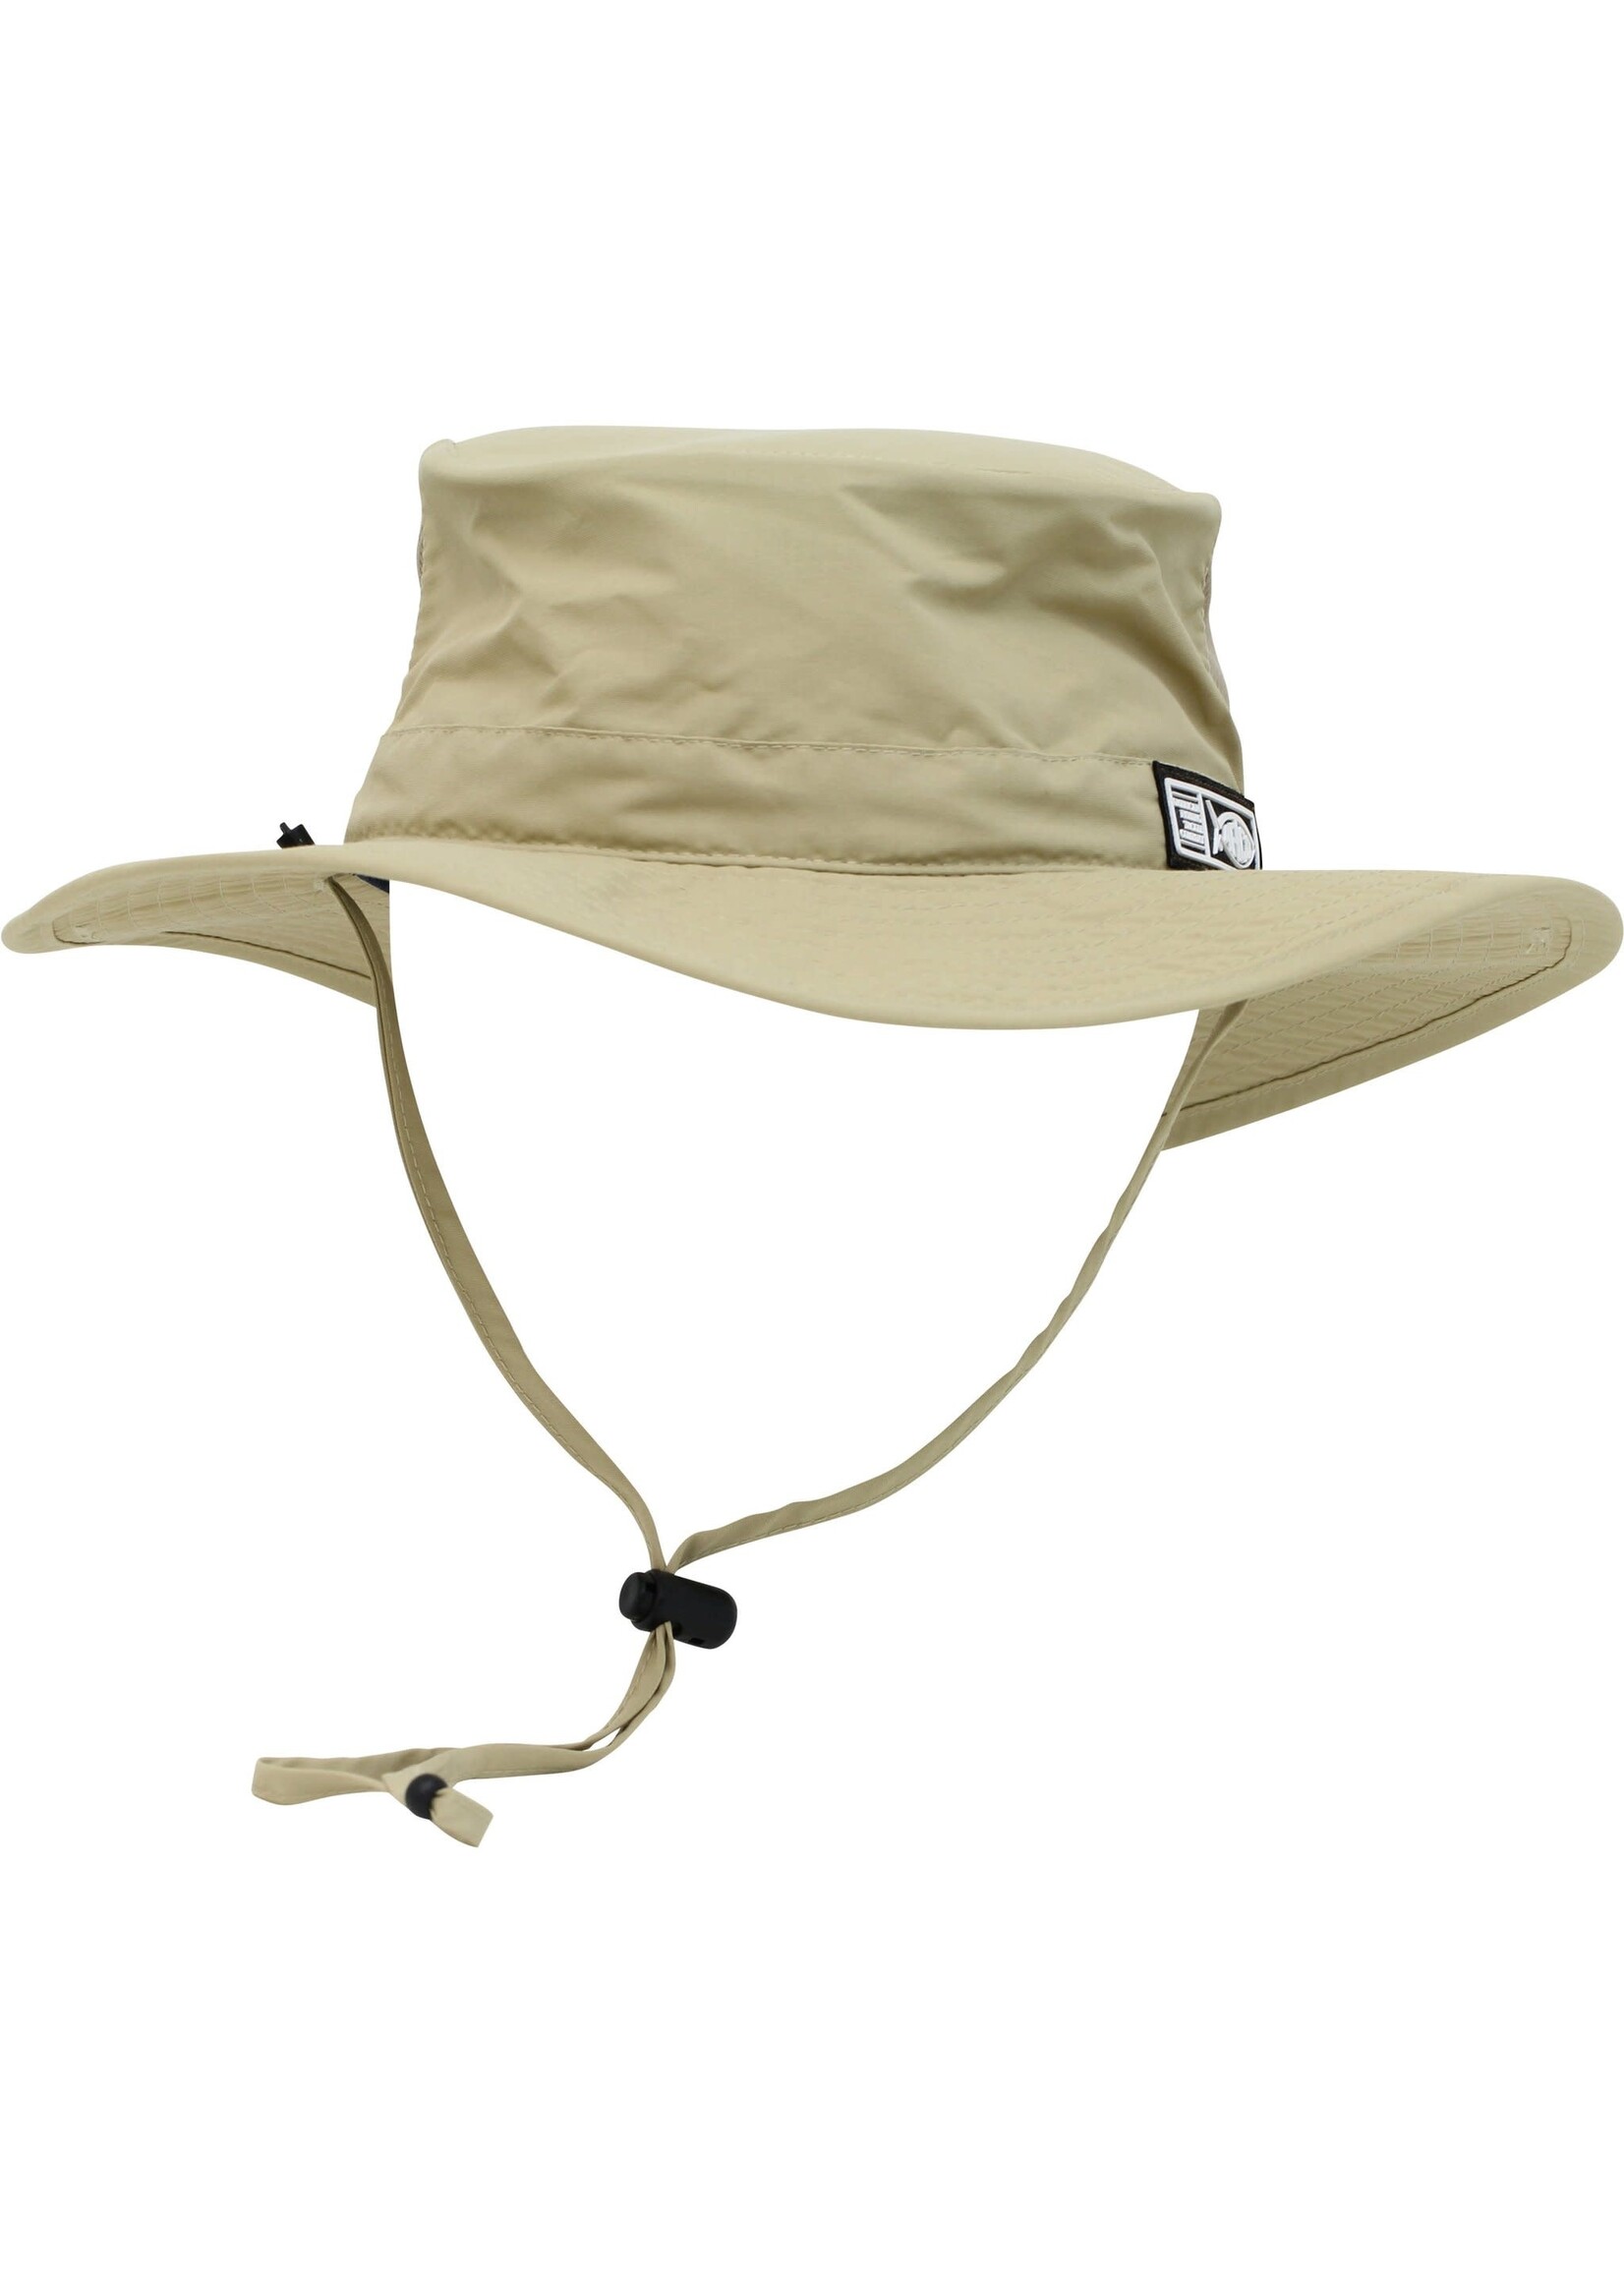 AFTCO AFTCO Tracker Booney Hat